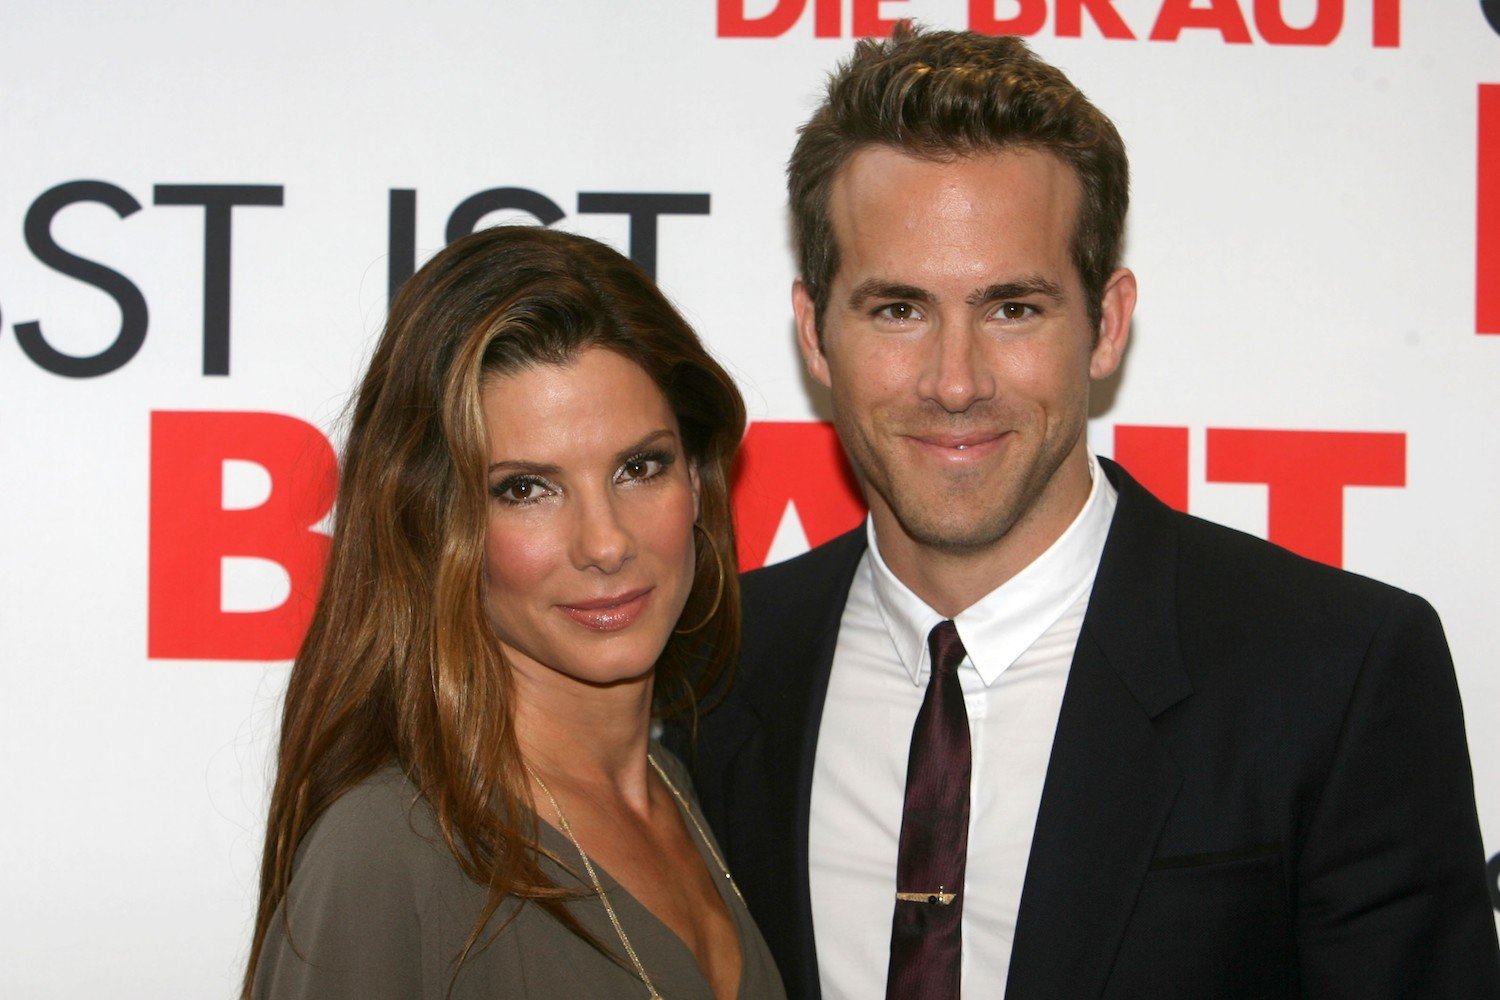 Sandra Bullock and Ryan Reynolds smile on the red carpet at the premiere of 'The Proposal' 